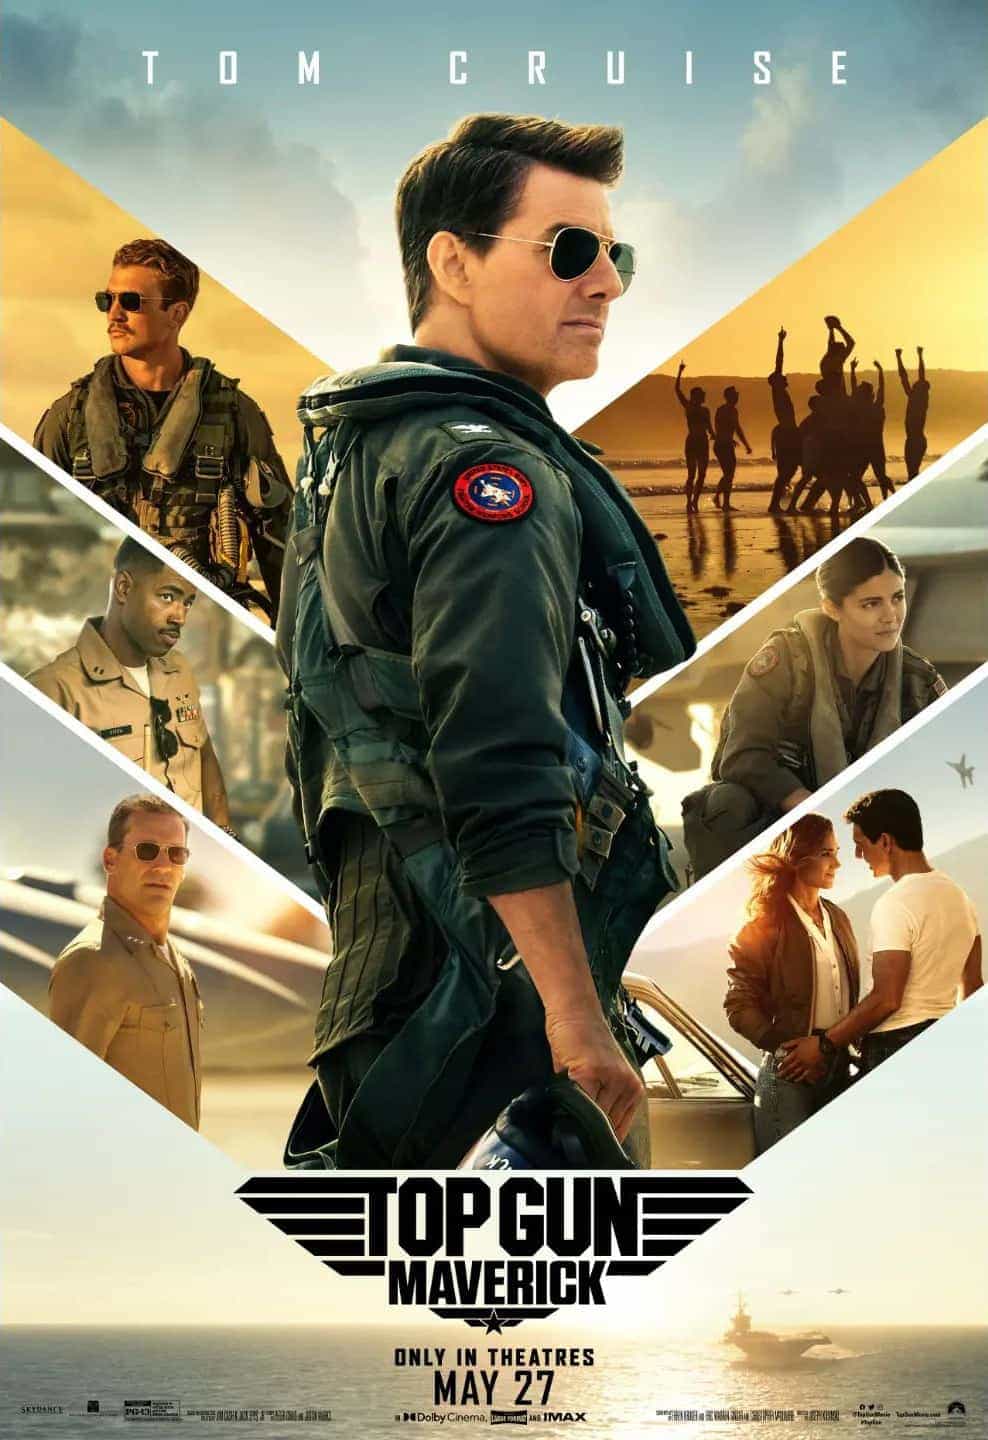 Tom Cruise stars in the first trailer for Top Gun Maverick - film released 17th July 2020